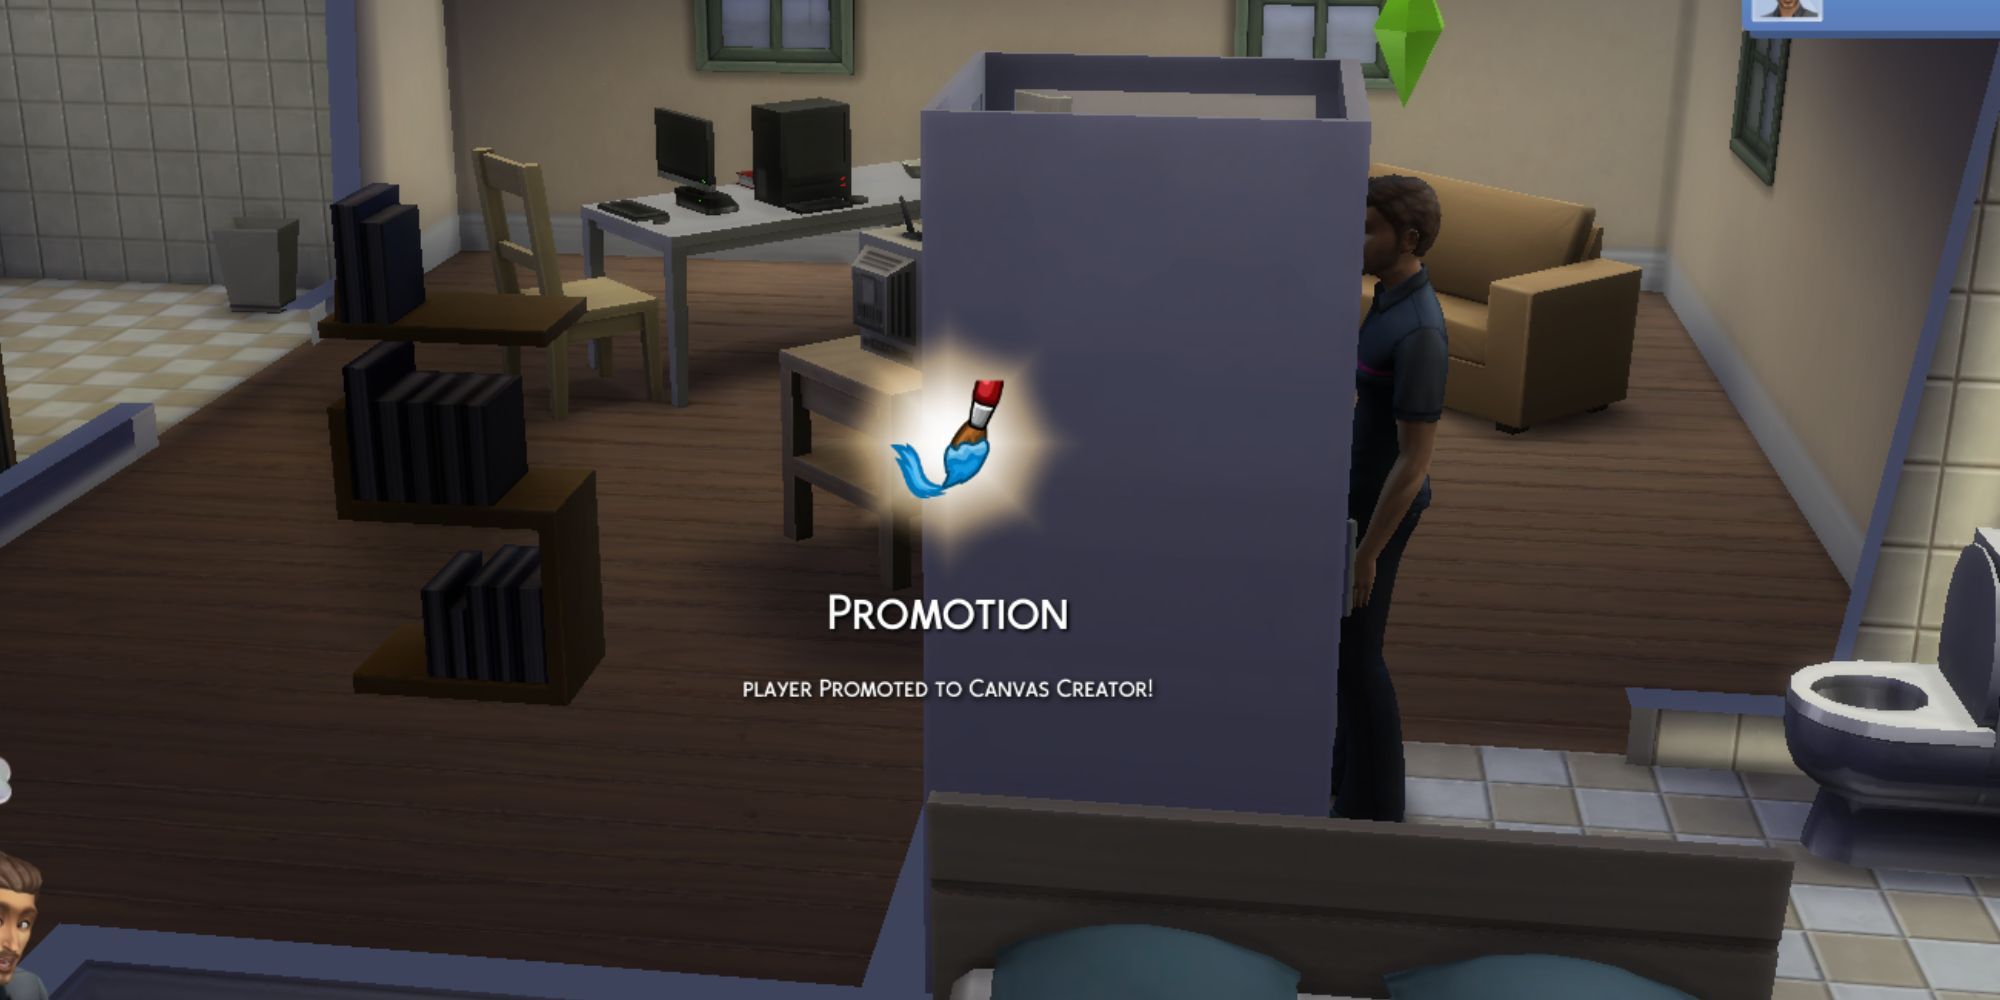 The Sims 4 Career Cheats List: How to Cheat Promotions & Unlock Hidden  Career Objects - Must Have Mods